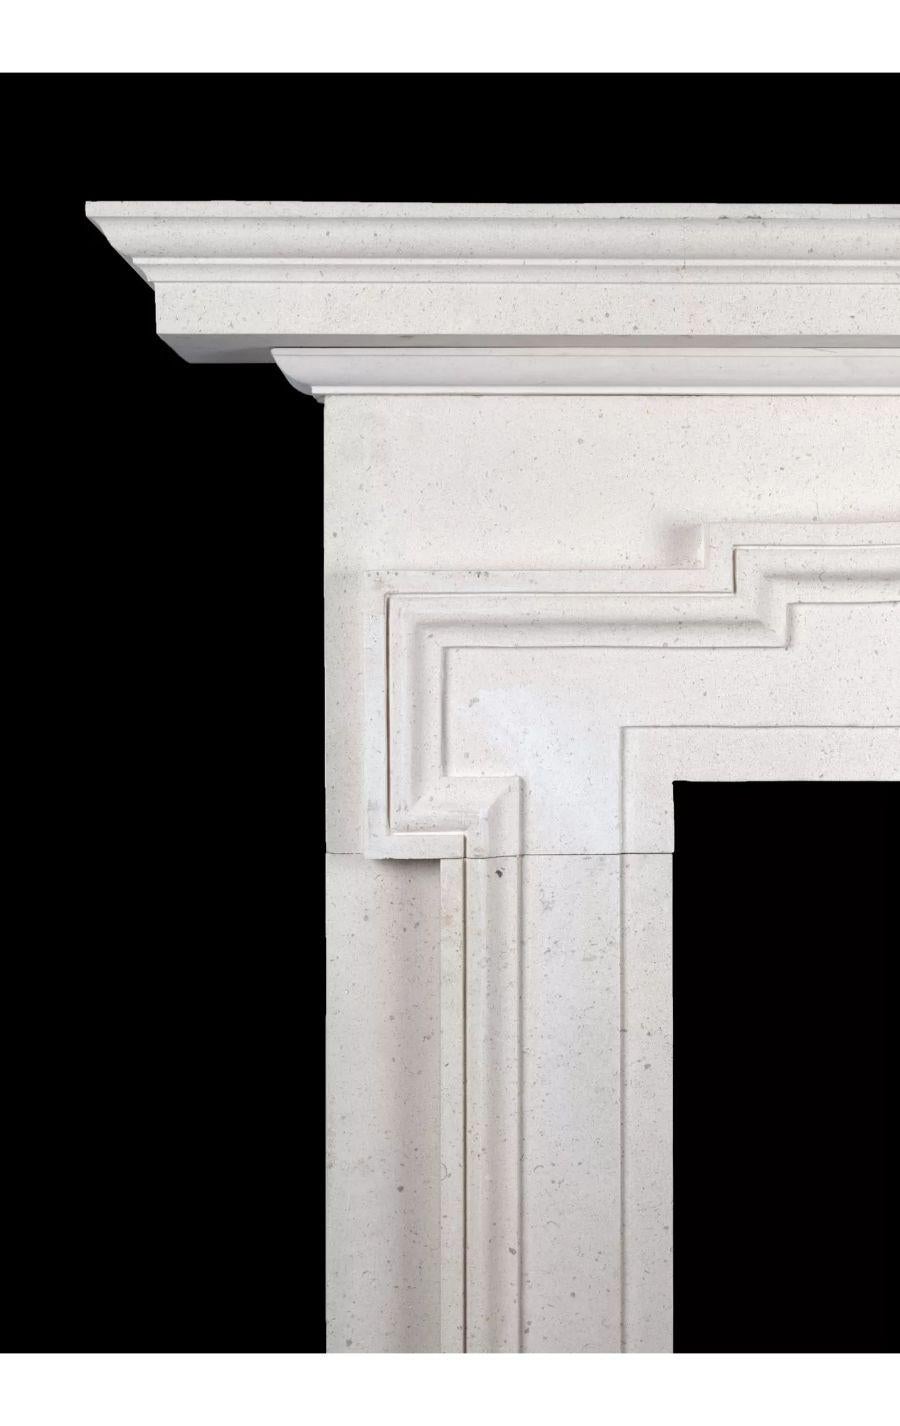 A hand carved limestone fireplace in the mid 18th century style.

A design where Palladian and Italian Baroque elements come together in harmony. 

Copied from an original mantelpiece installed in Henrietta street Dublin and featured in Batty